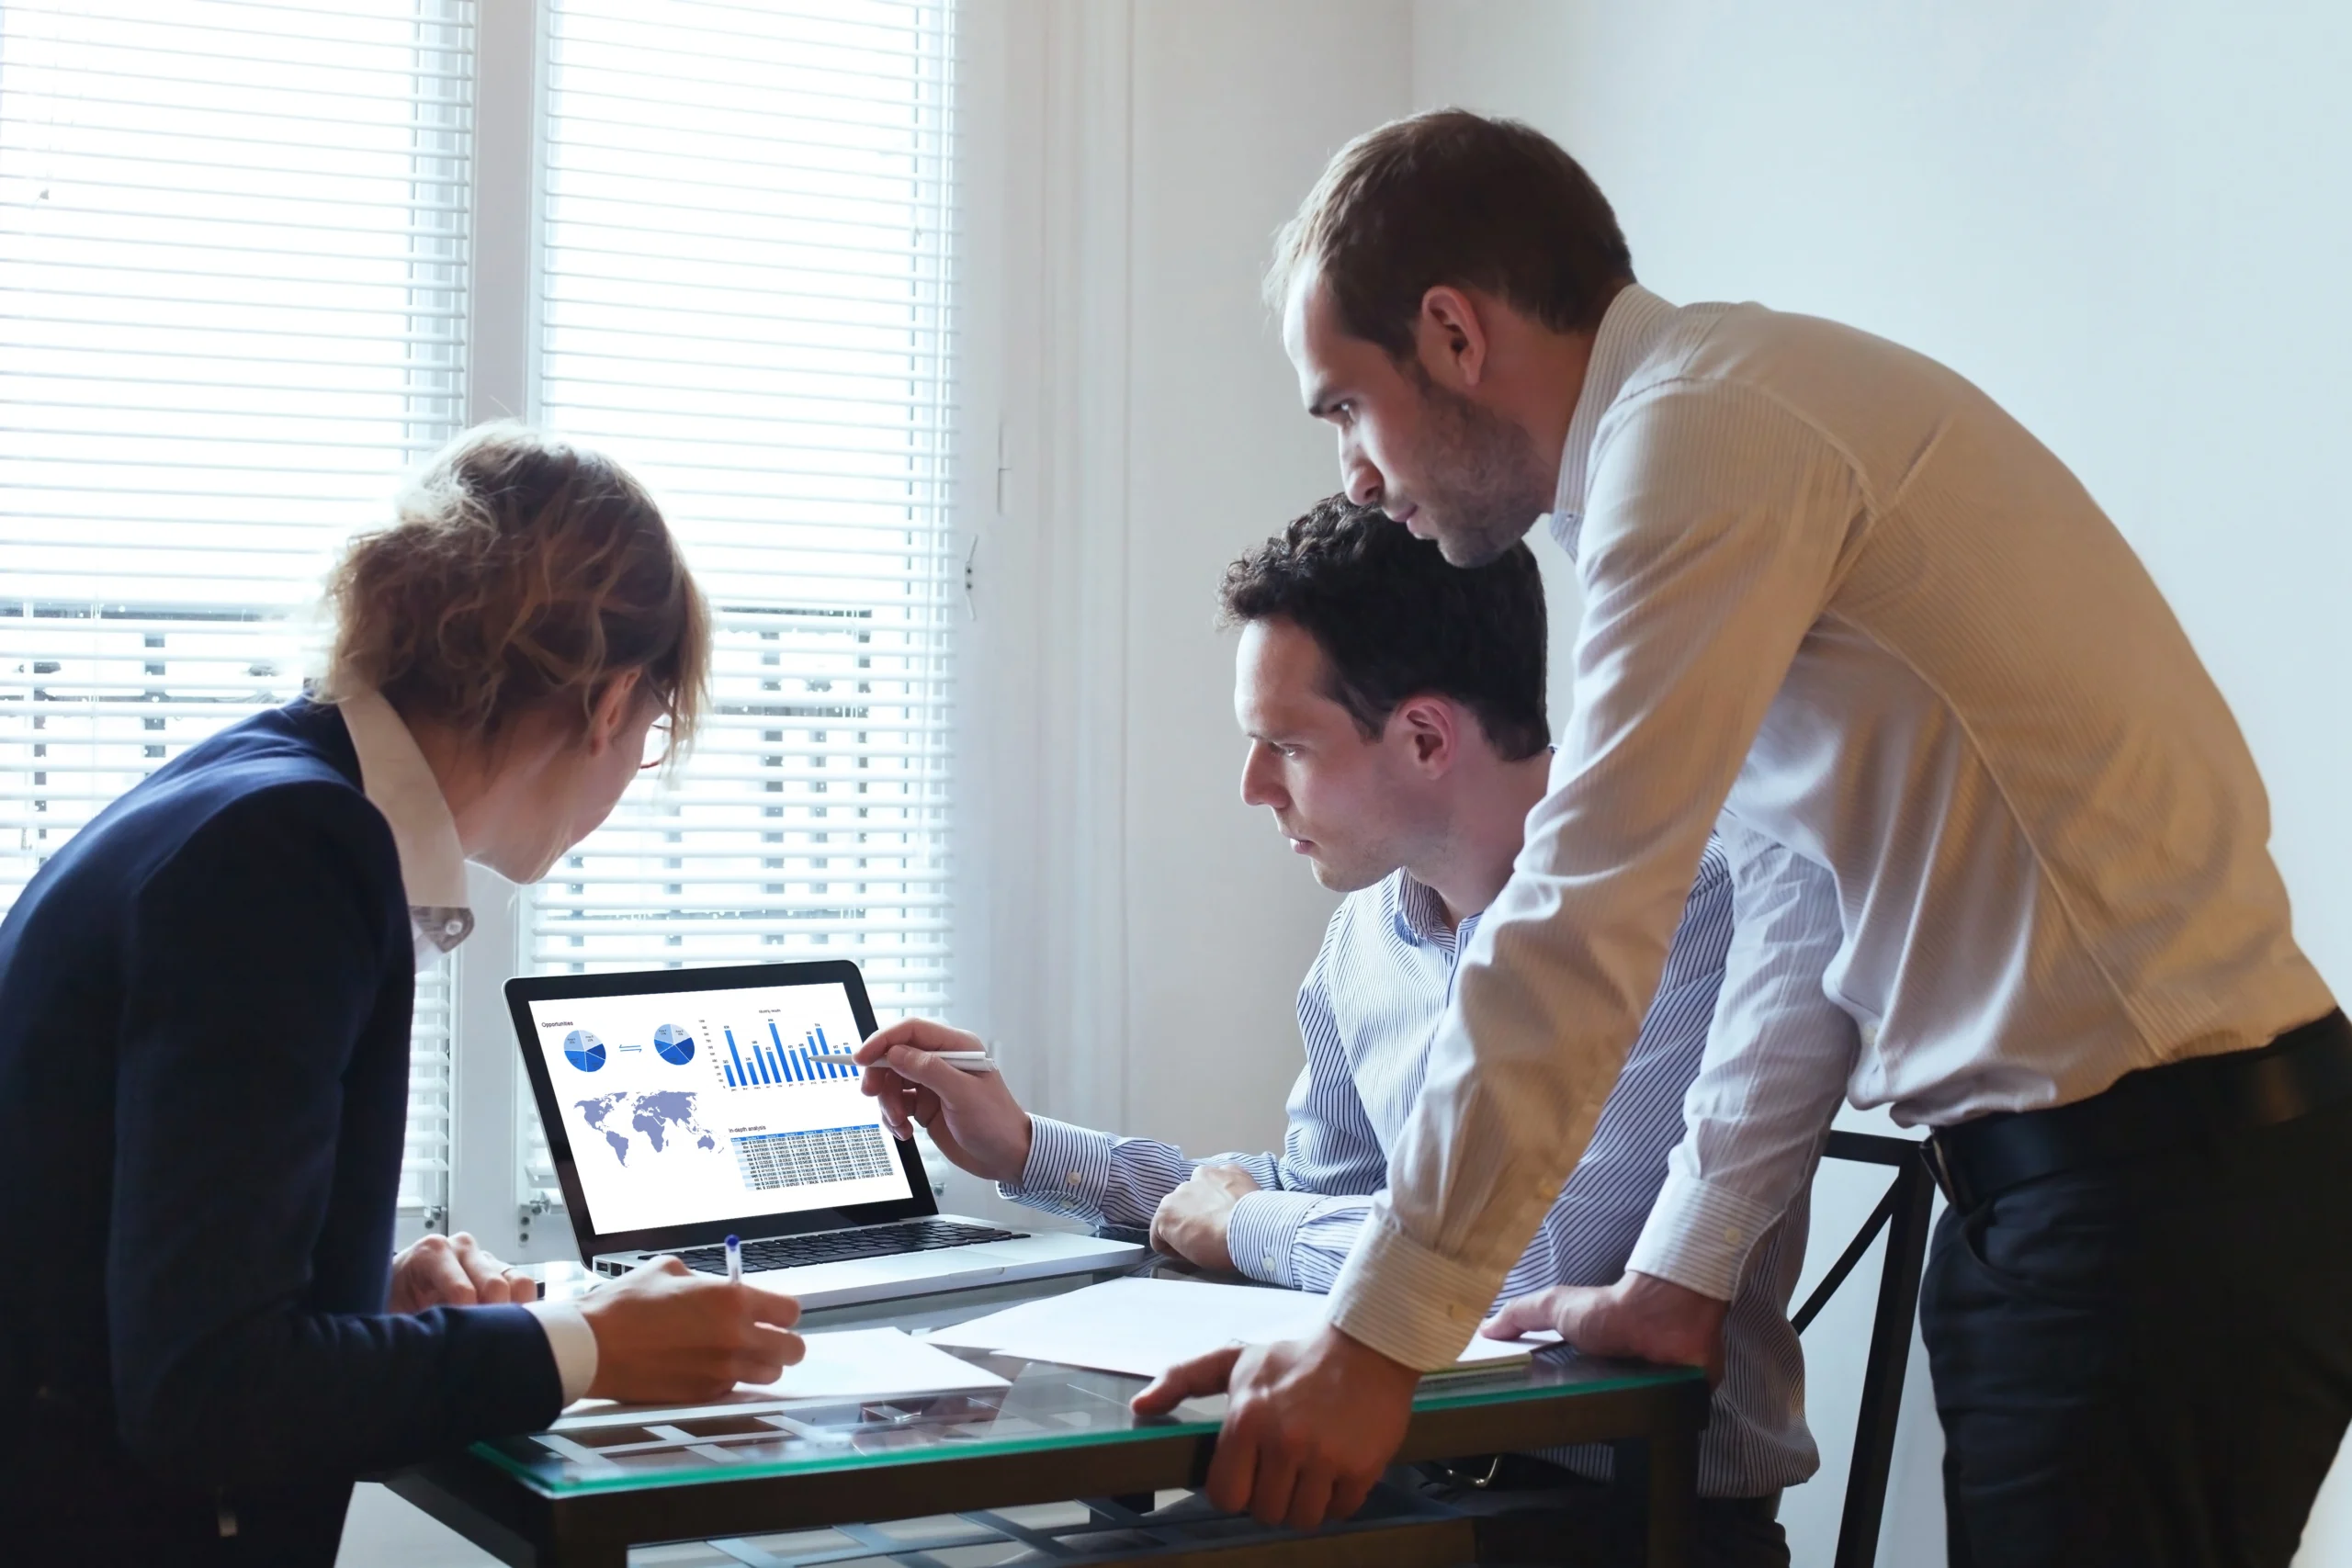 A stock image of a team of three market researchers poring over a computer with charts and graphs on the screen